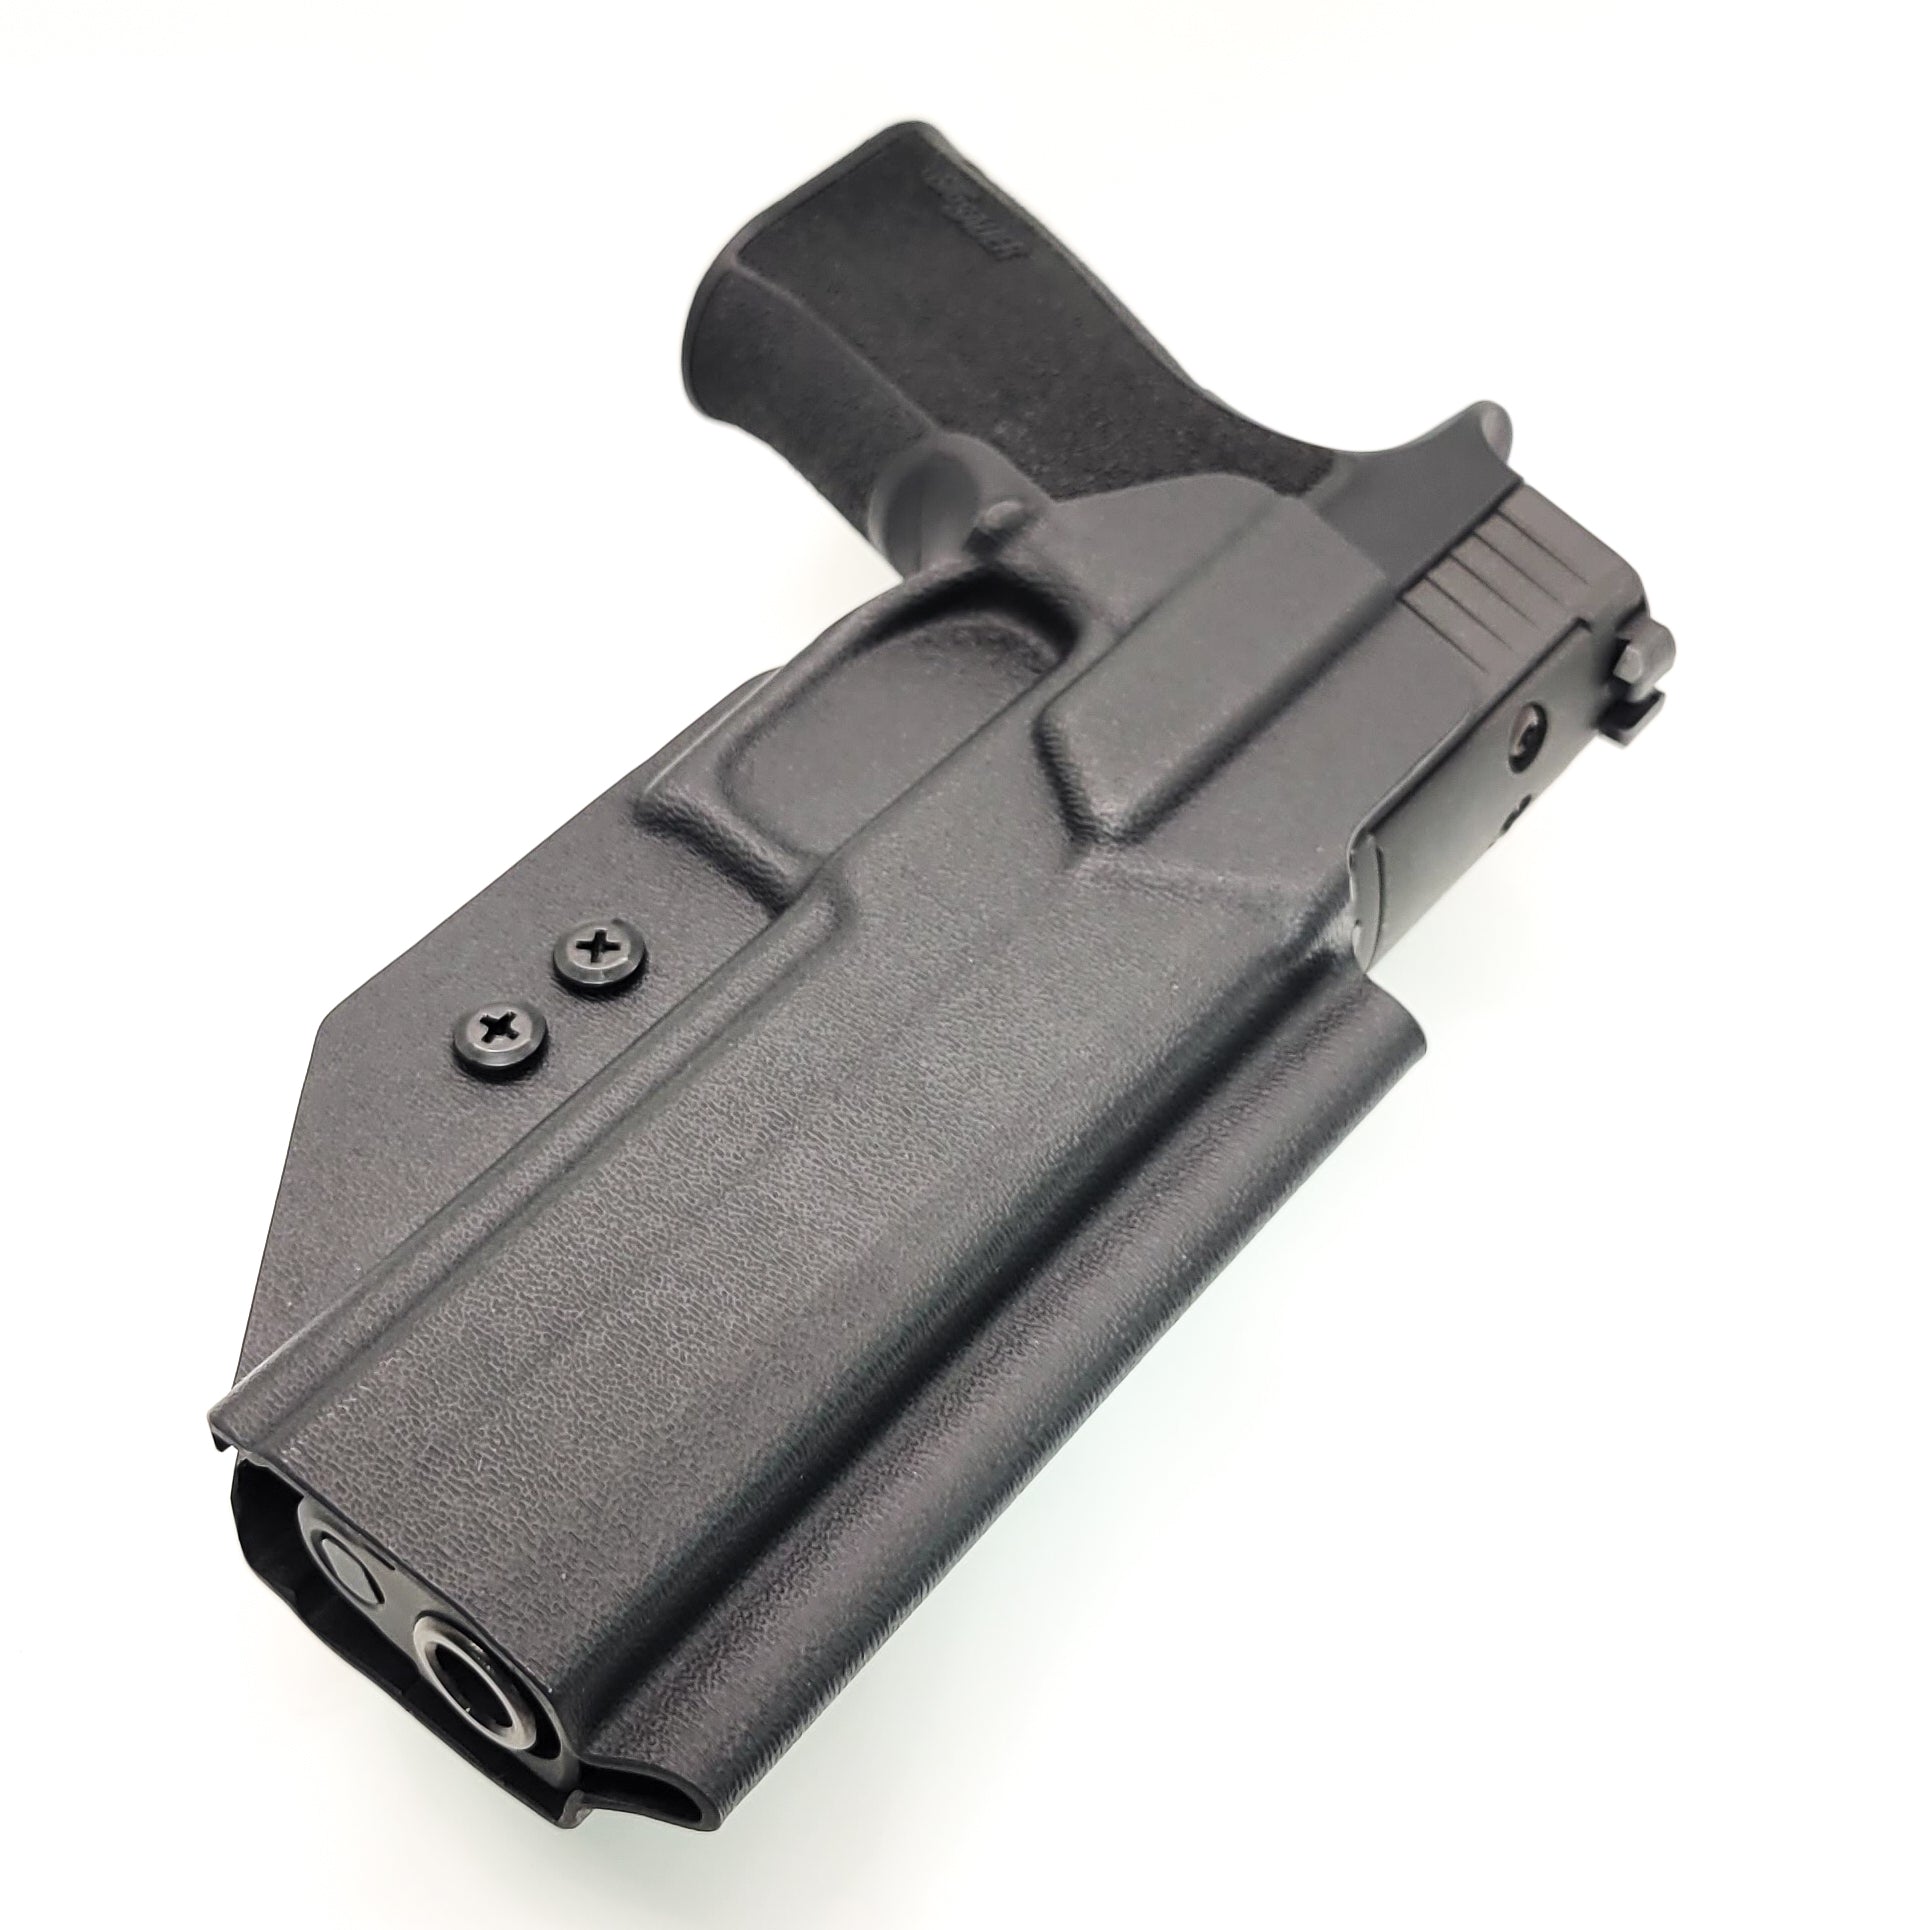 Outside Waistband OWB Kydex Taco Style Holster designed to fit the Sig Sauer 10MM with the GoGunsUSA Gas Pedal.  Full sweat guard, adjustable retention, open muzzle and profiled for a red dot sight. Proudly made in the USA for veterans and law enforcement. 10 MM P320-XTEN, P320 X Ten or P 320  XTEN.